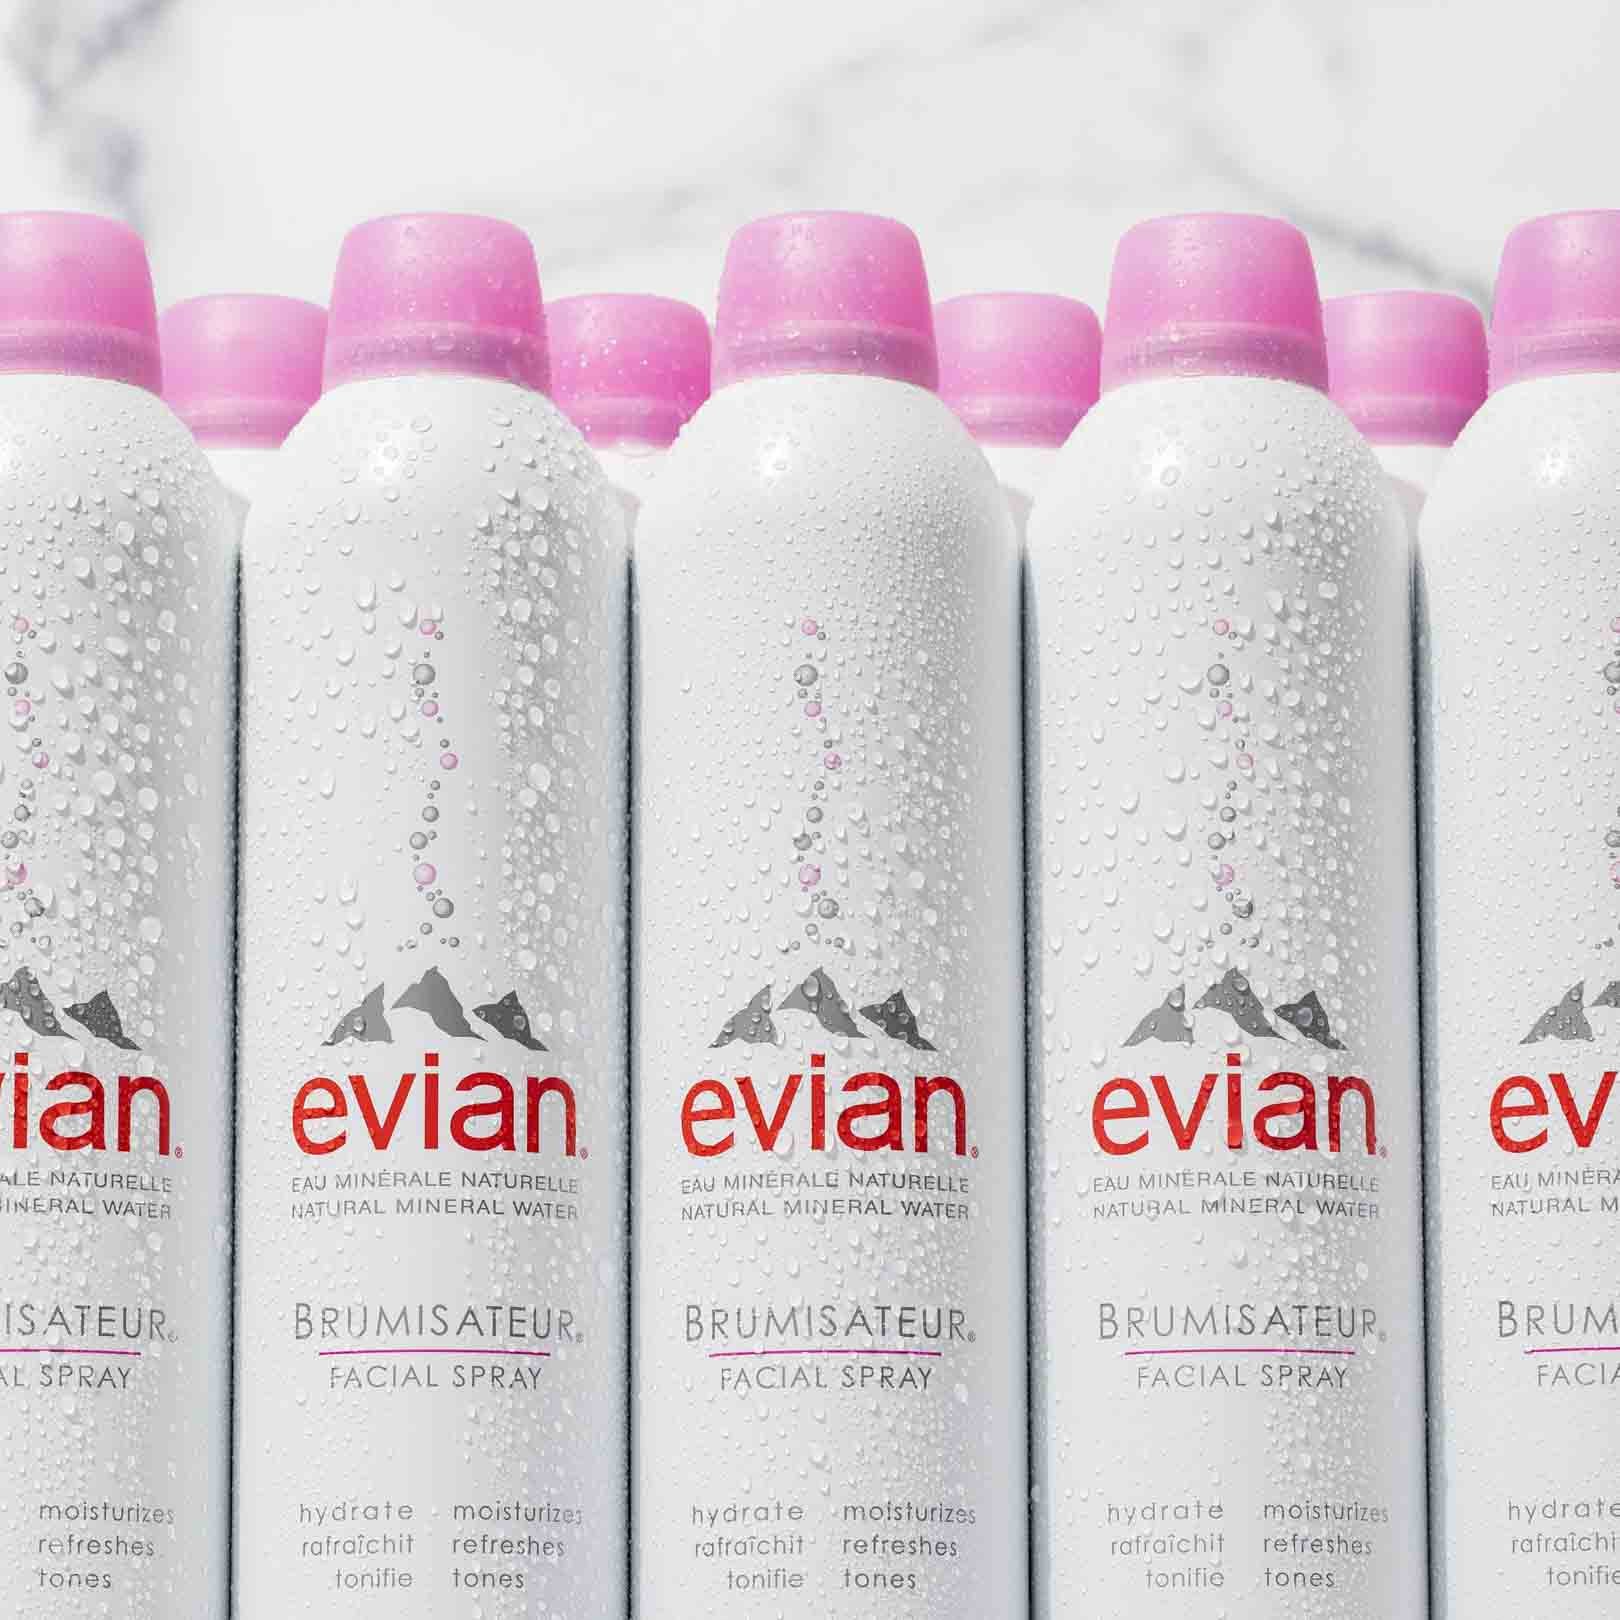 evian facial spray product photography for e-commerce minnesota based photographer jeremy lee